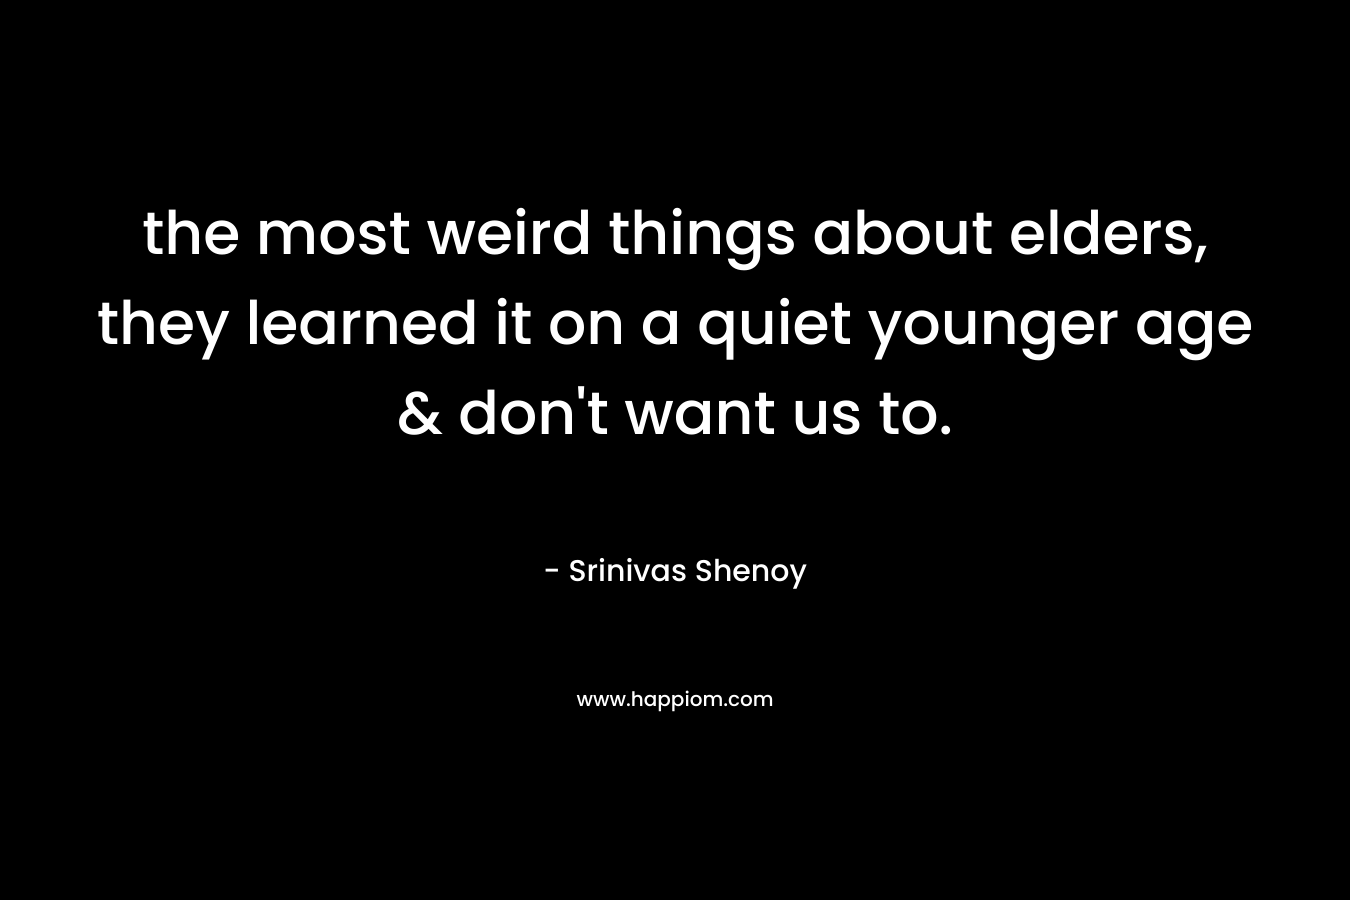 the most weird things about elders, they learned it on a quiet younger age & don’t want us to. – Srinivas Shenoy